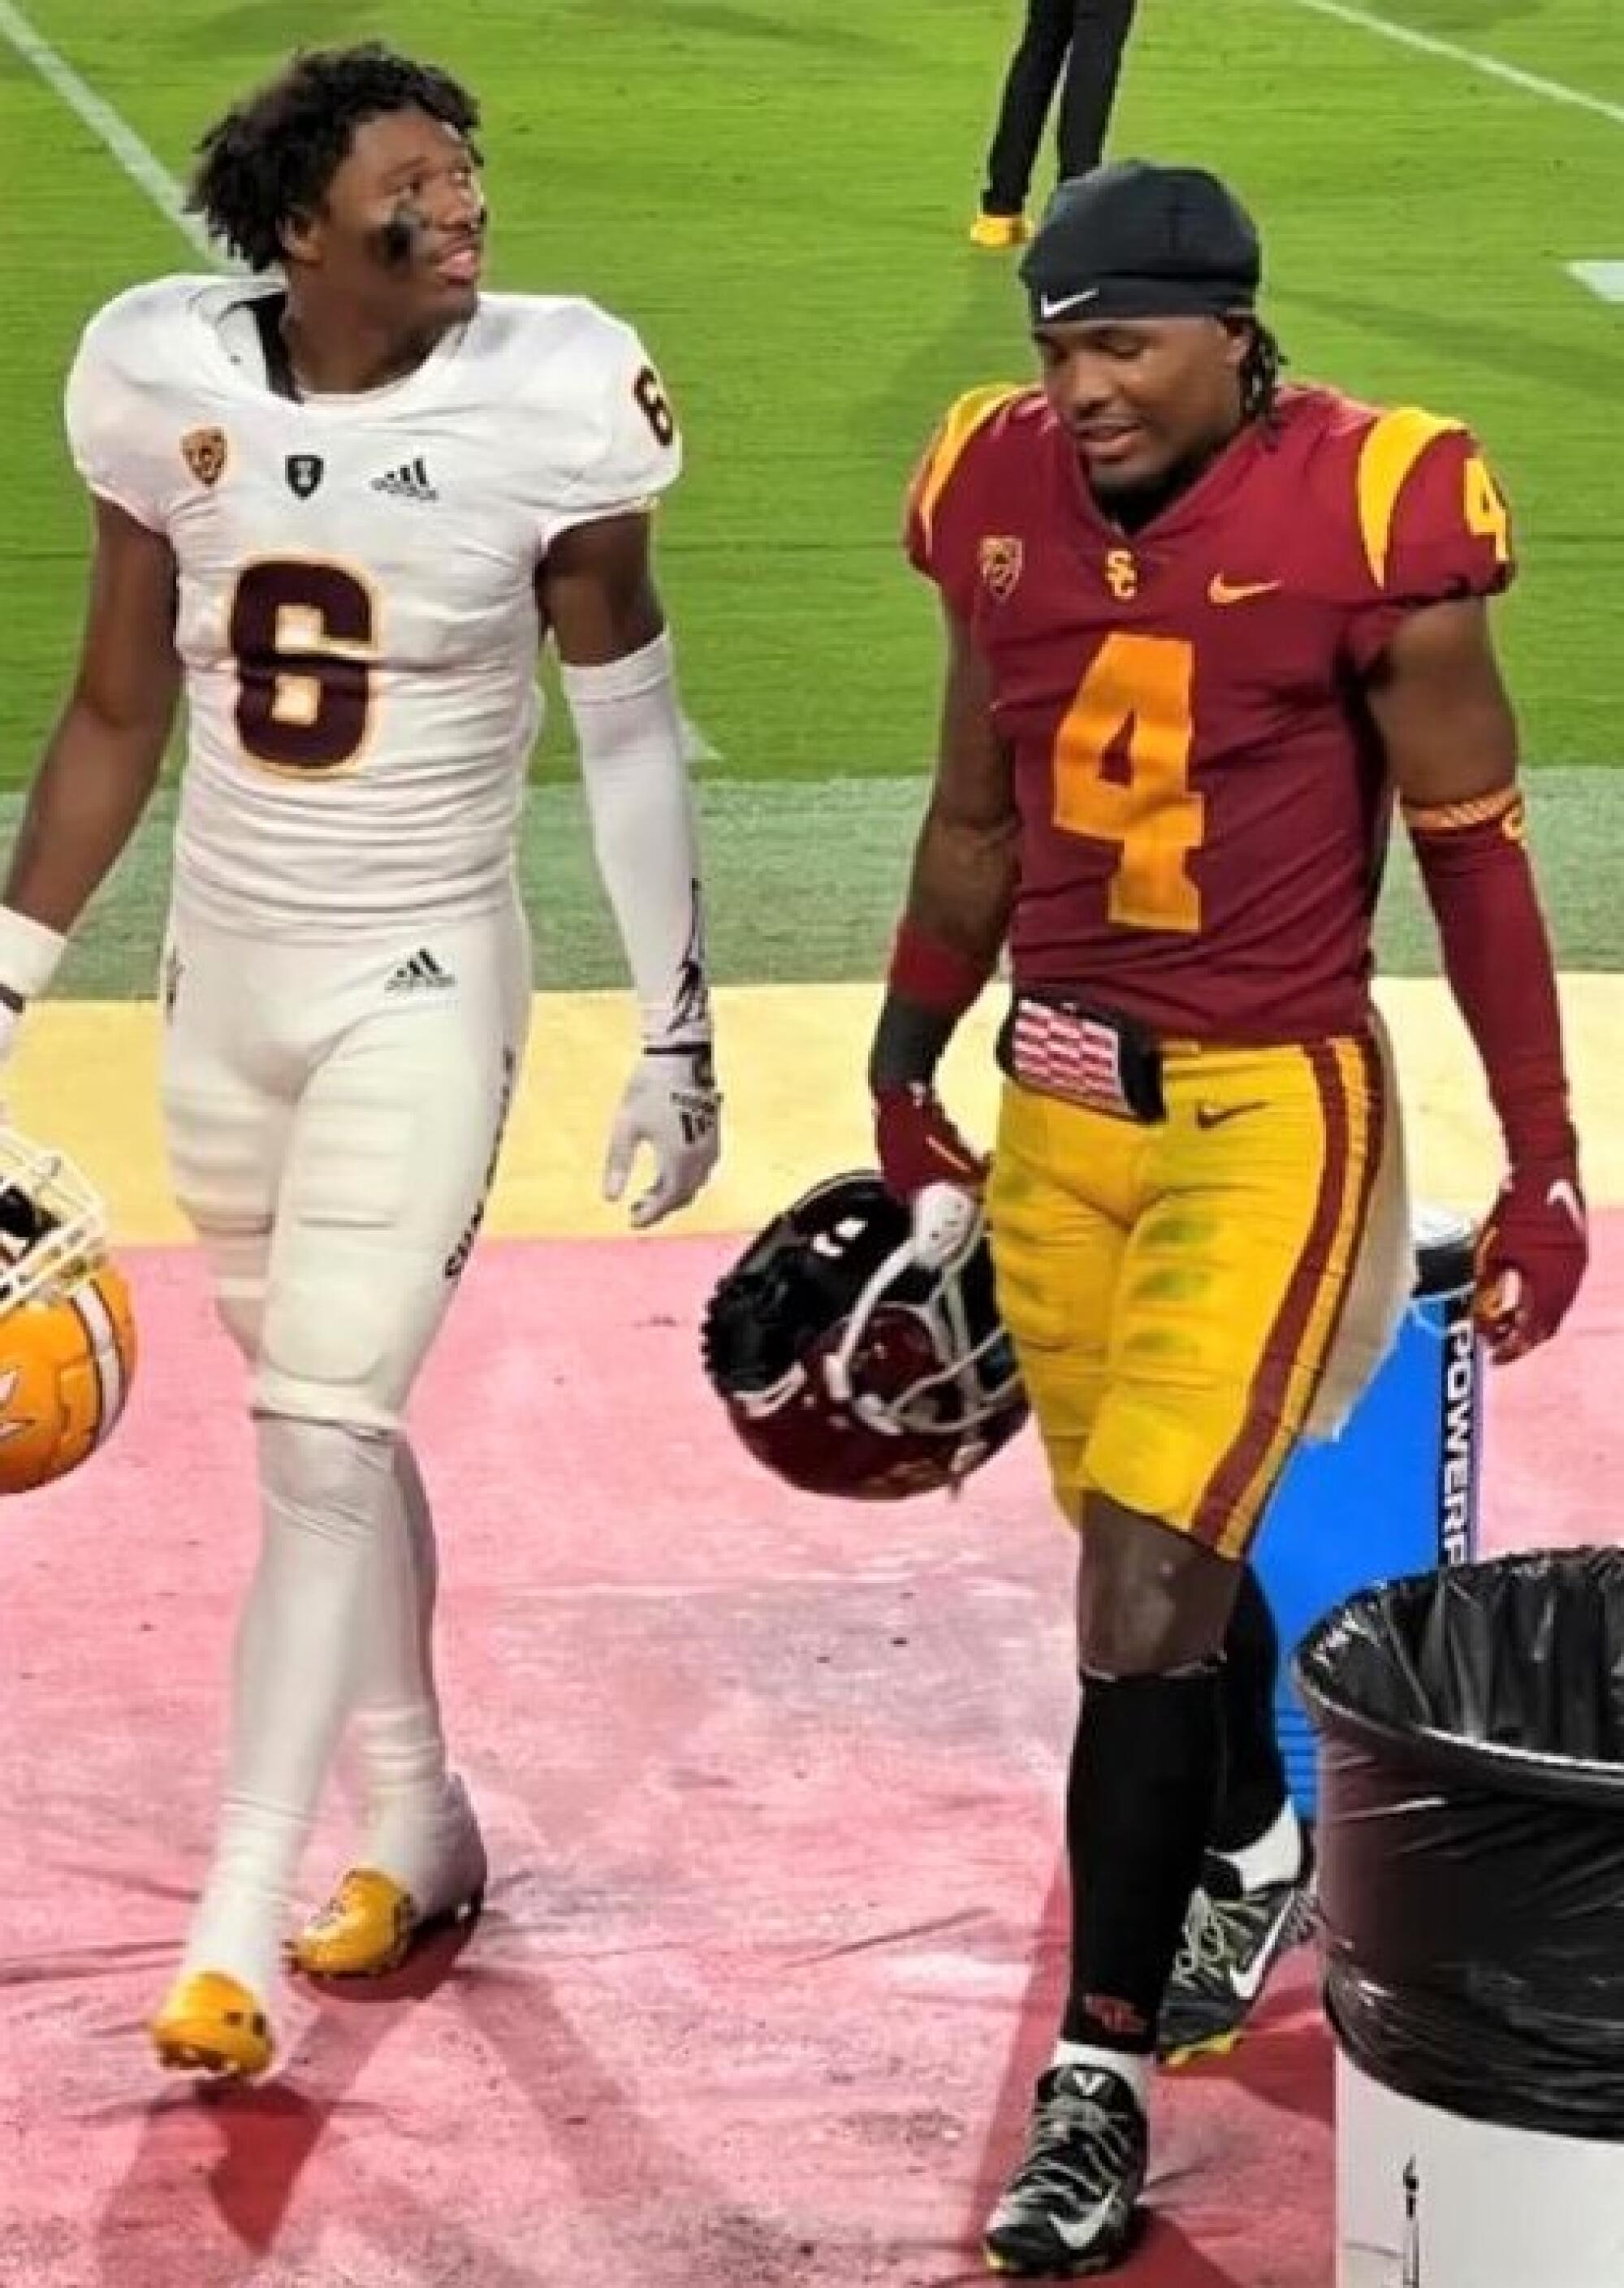 Brothers Macen and Max Williams walk off the field together following the ASU-USC game in 2022.